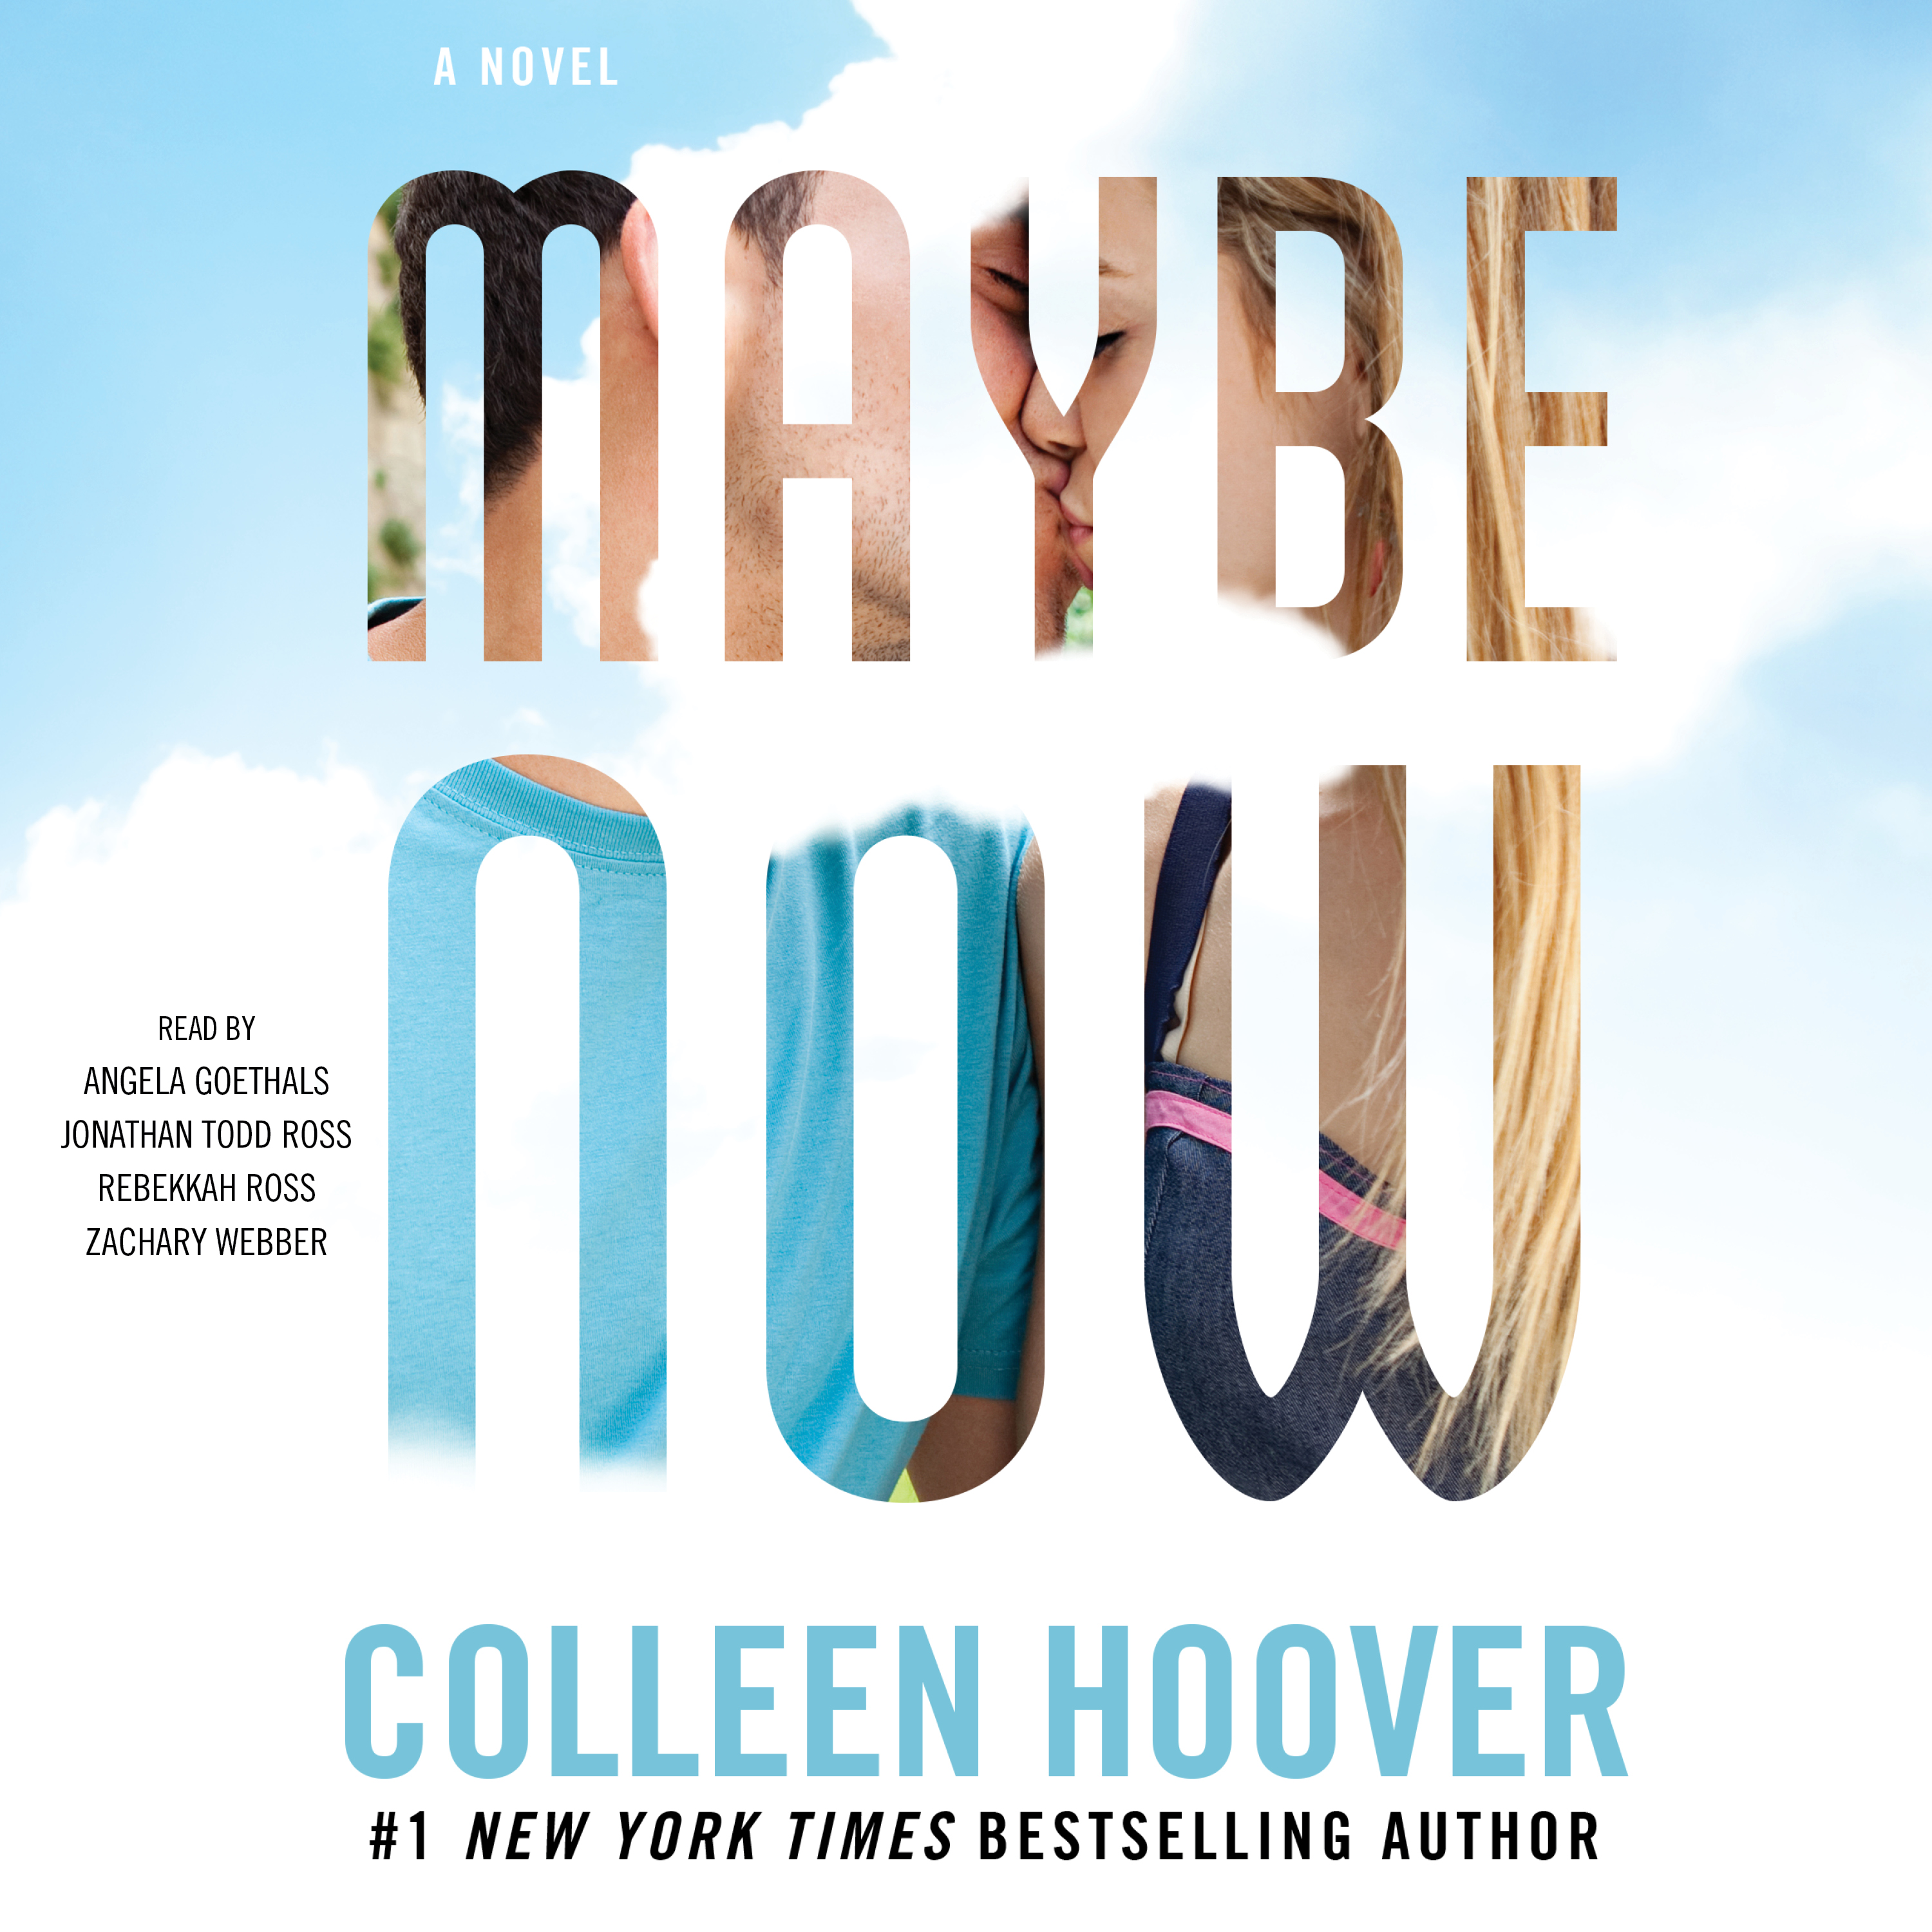 maybe not colleen hoover pdf english